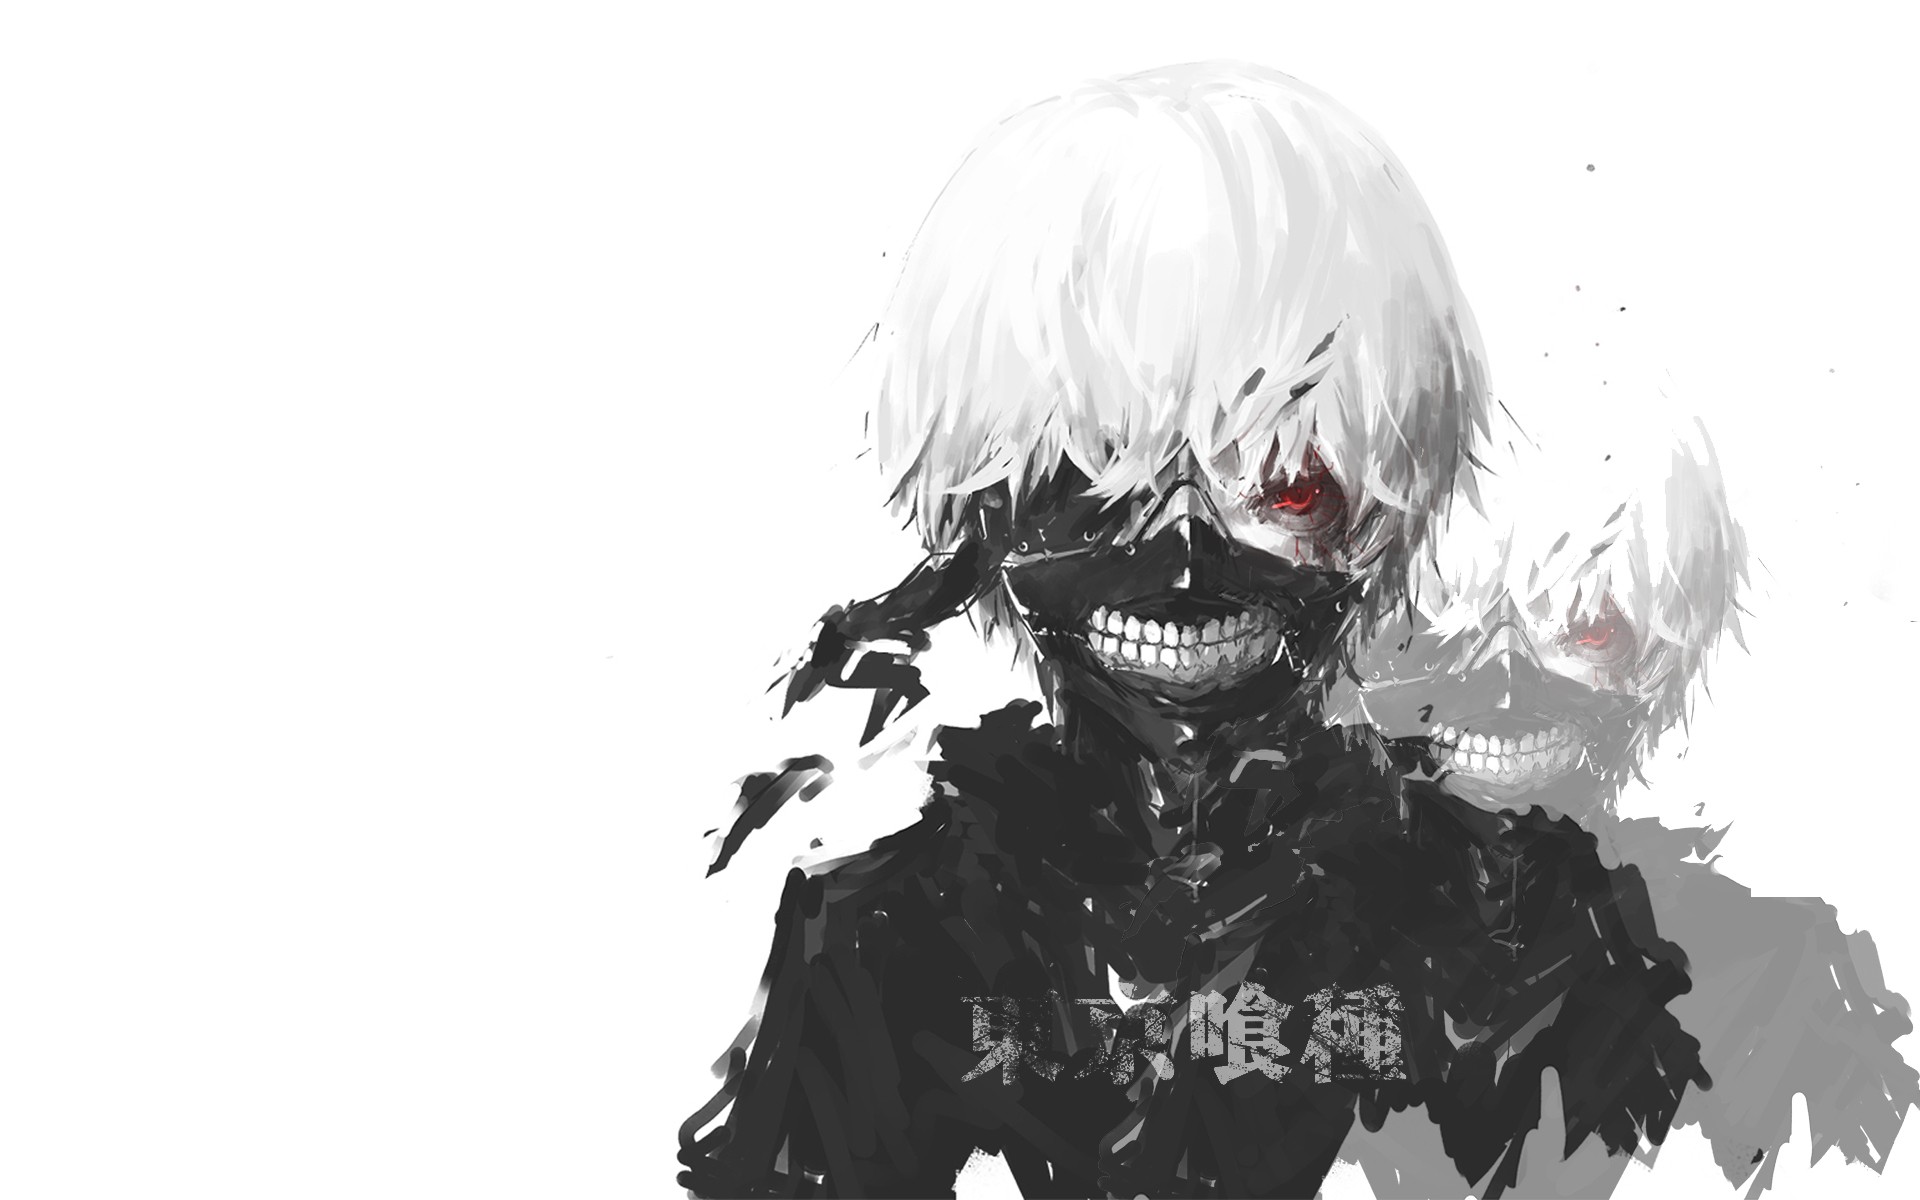  Tokyo  Ghoul  background   Download free beautiful 